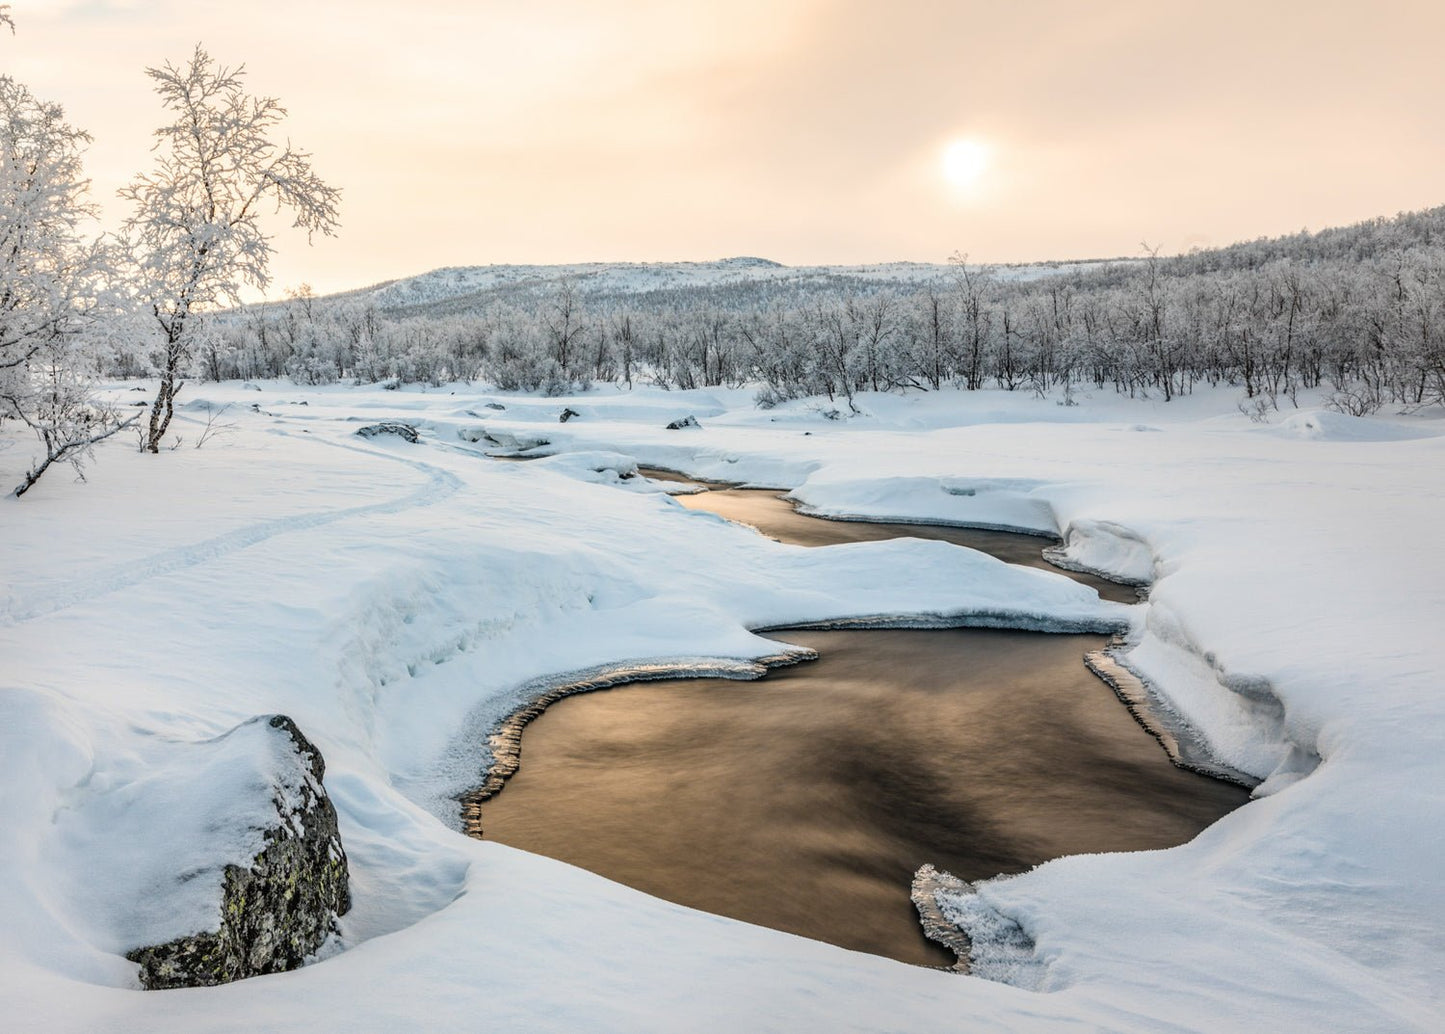 Arctic photo of frozen river, frosty birches, snowy fells, and bronze sunlight reflection.